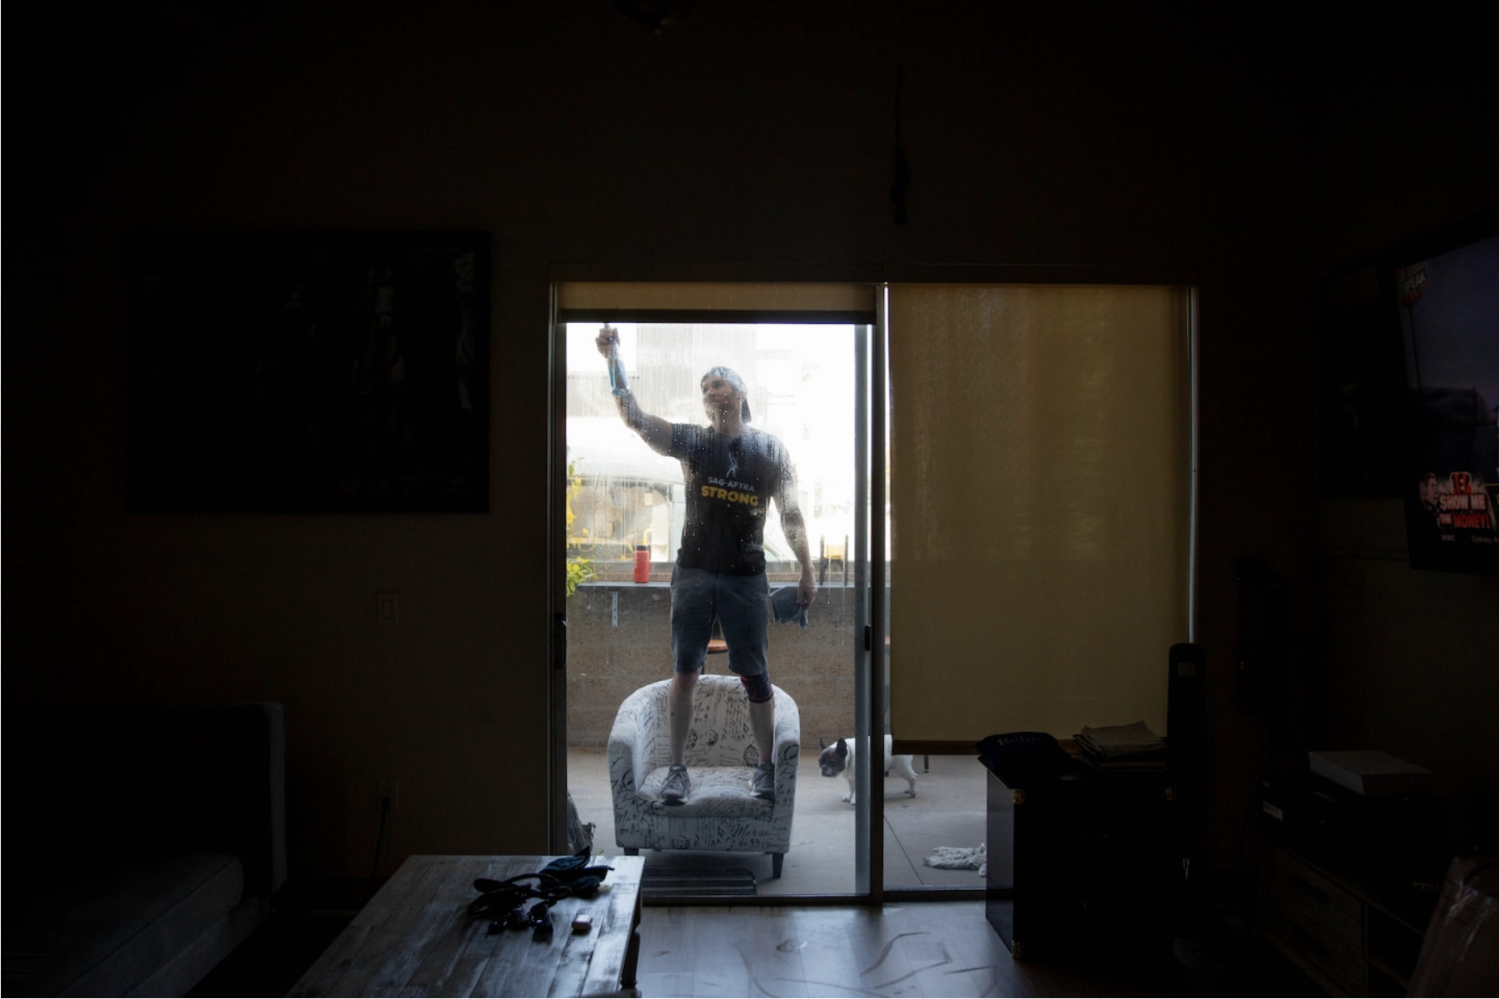 Actor Josh Hooks cleans an apartment in Venice for extra cash. (Allison Zaucha for The Washington Post)